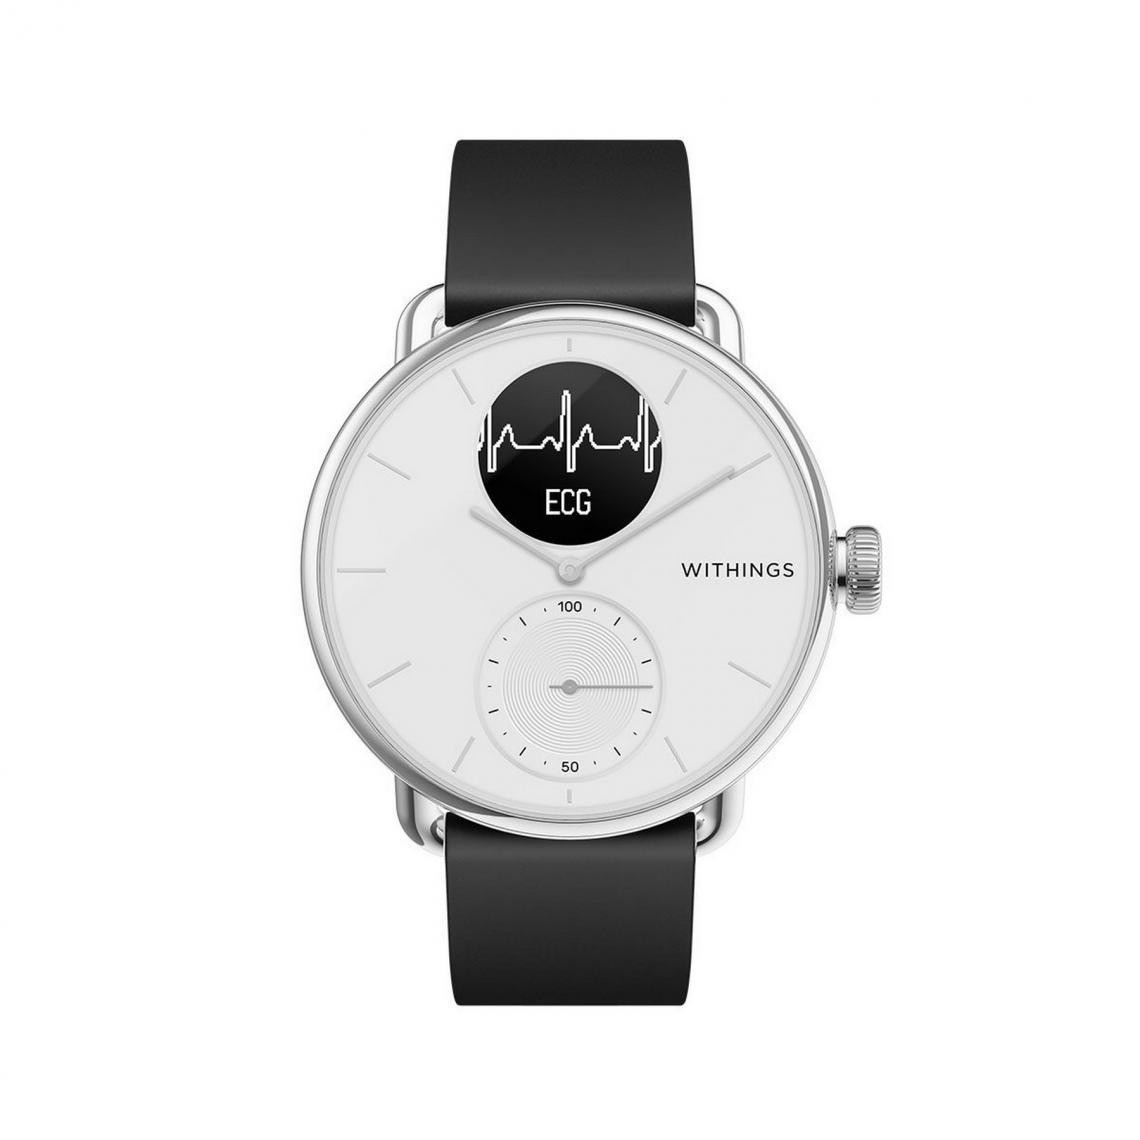 Withings - Montre connectée Homme WITHINGS Montres SCANWATCH 3 Aiguilles - Induction HWA09-model 1-All-Int - Bracelet Silicone Gris - Montre connectée